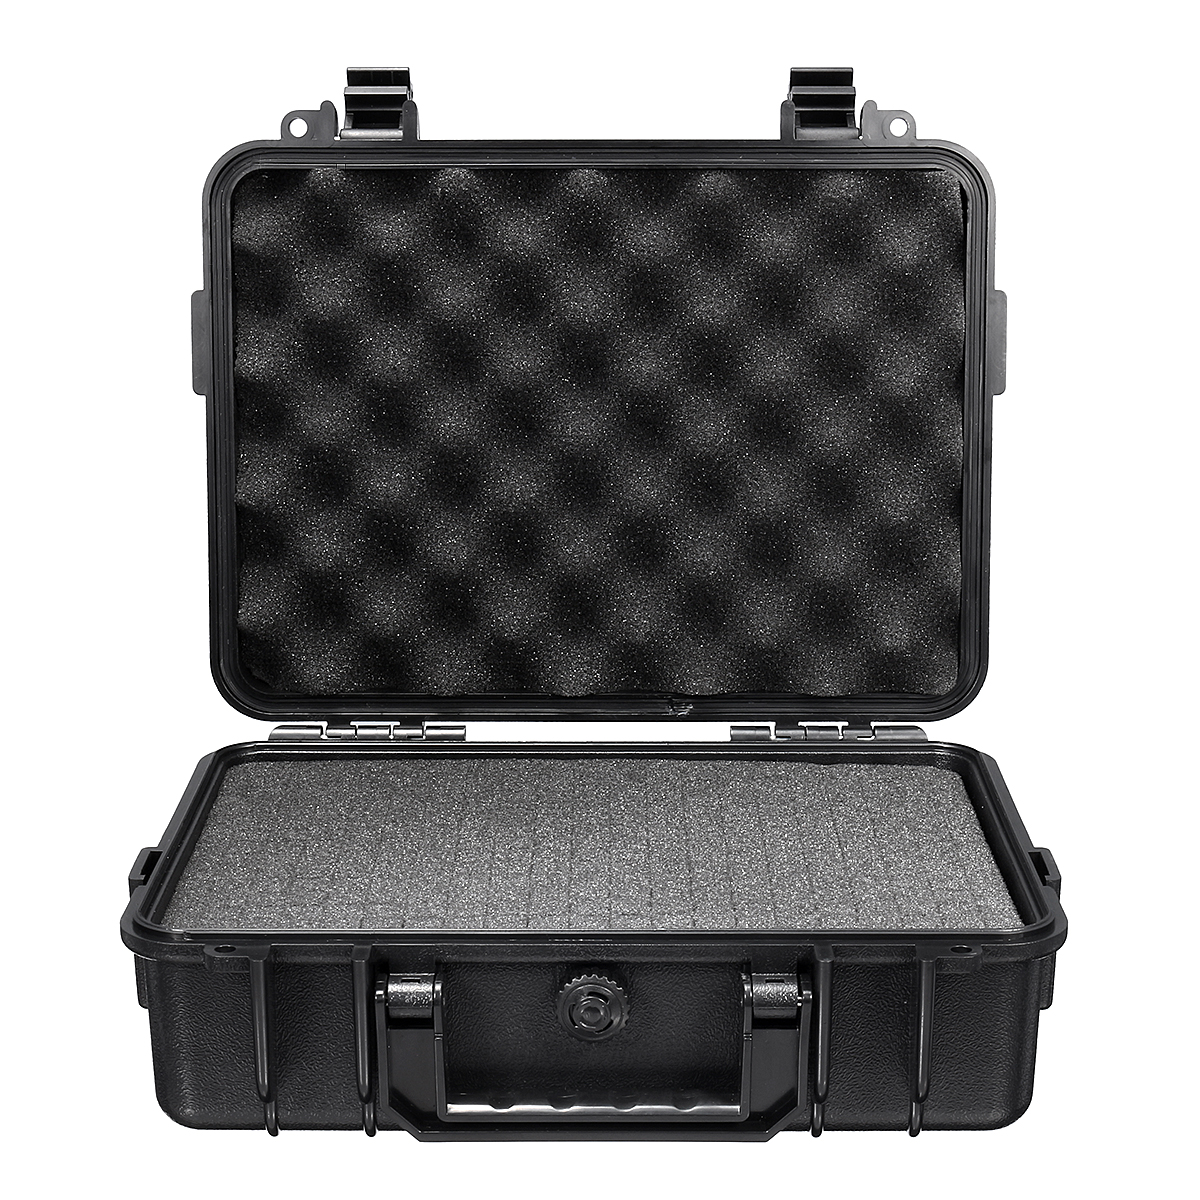 Waterproof-Hard-Carry-Tool-Case-Bag-Storage-Box-Camera-Photography-with-Sponge-1636226-5